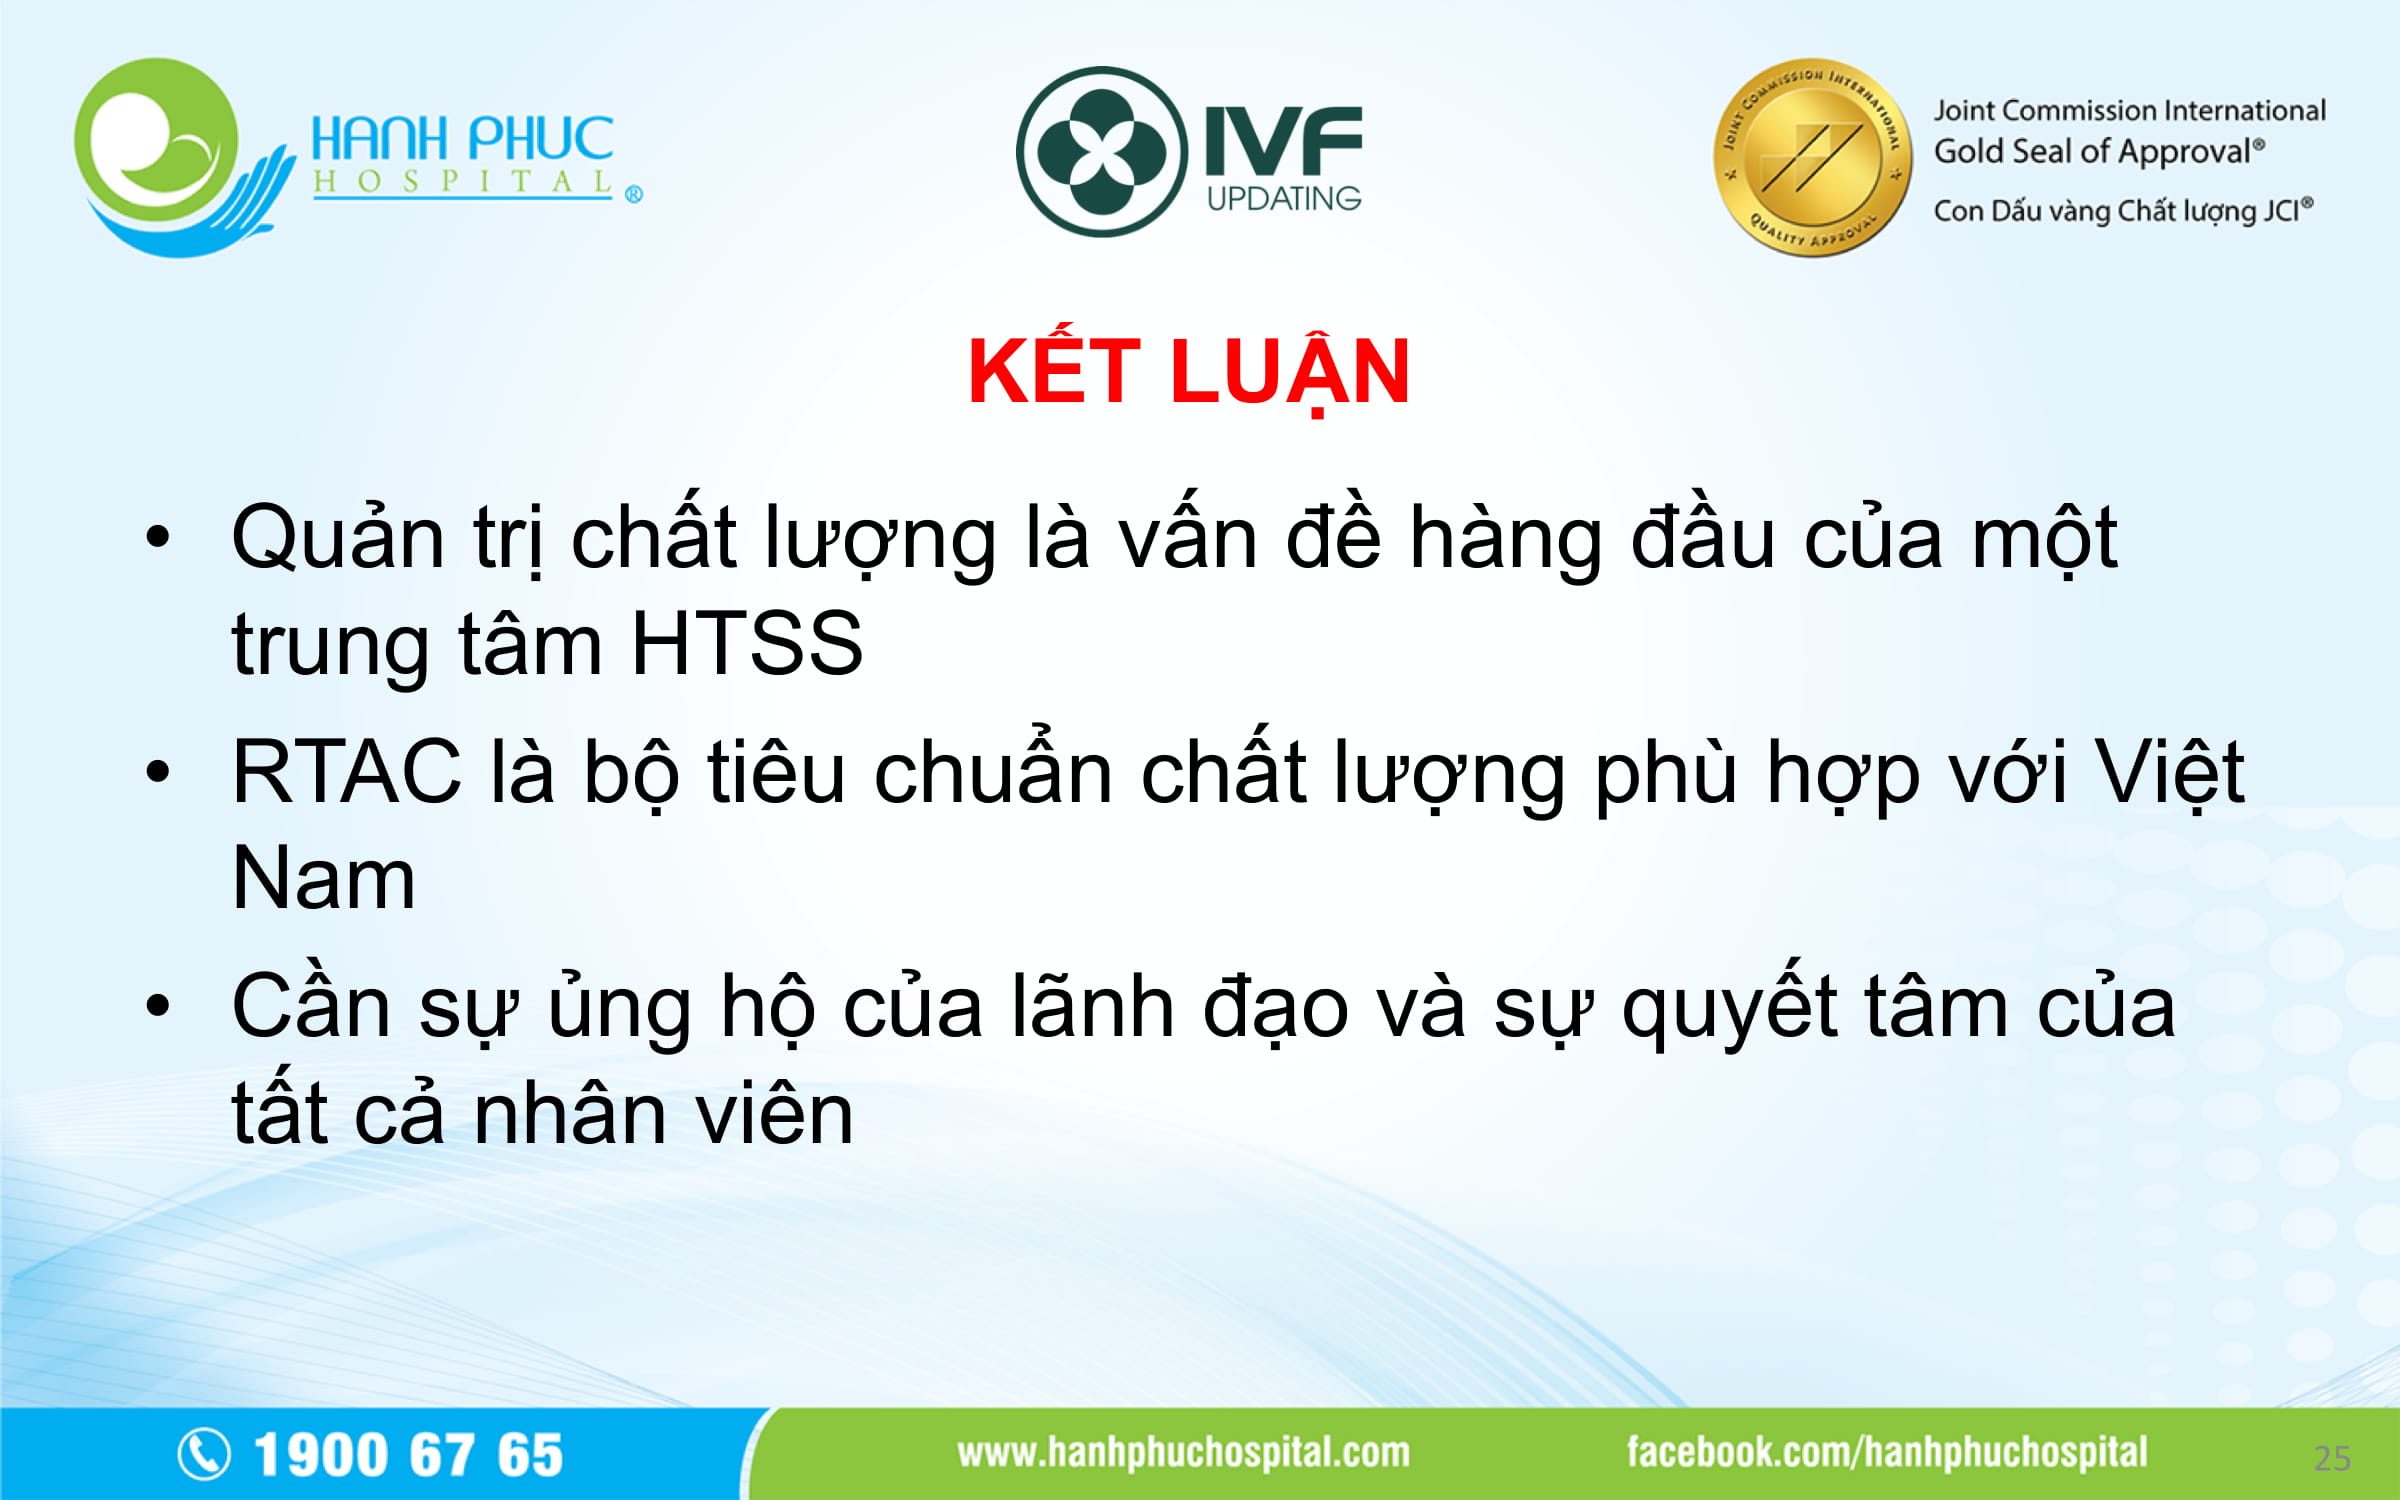 BS Vo Thien An Report_IVF UPDATING 5-25